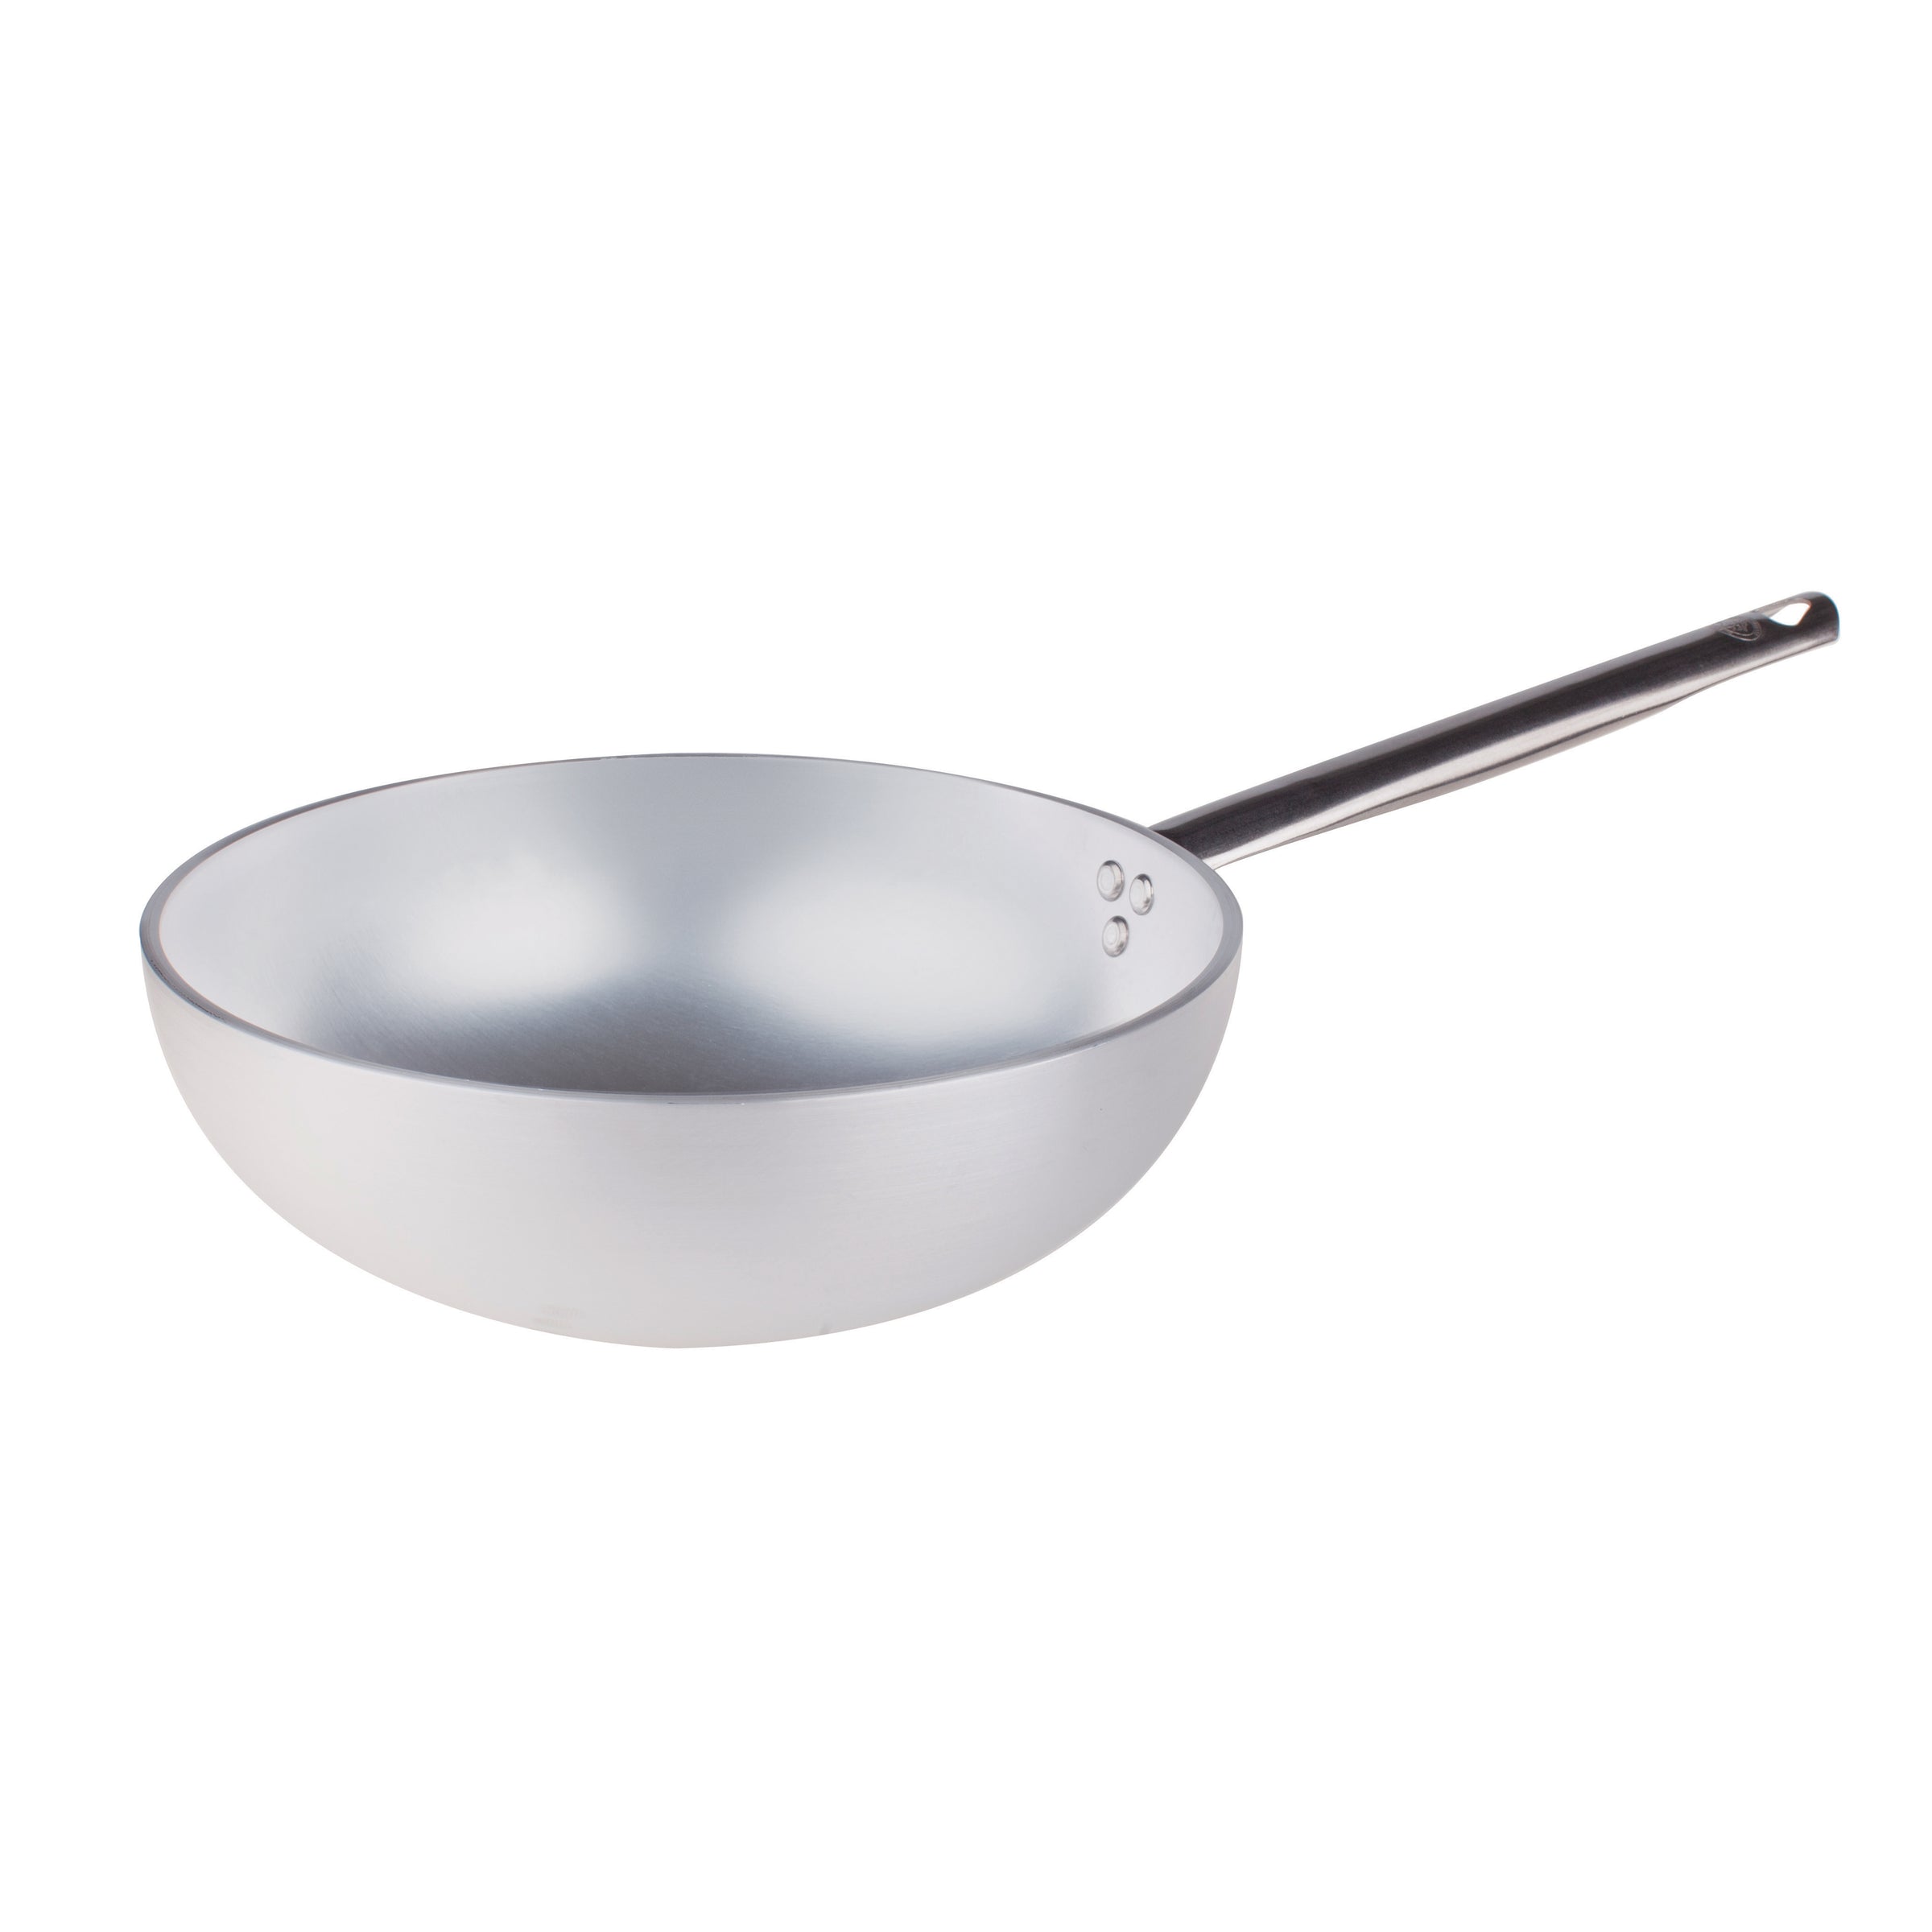 Pentole Agnelli Radiant Flat Bottom Wok with Stainless Steel Handle, Aluminium - Silver, Silver, 32 cm